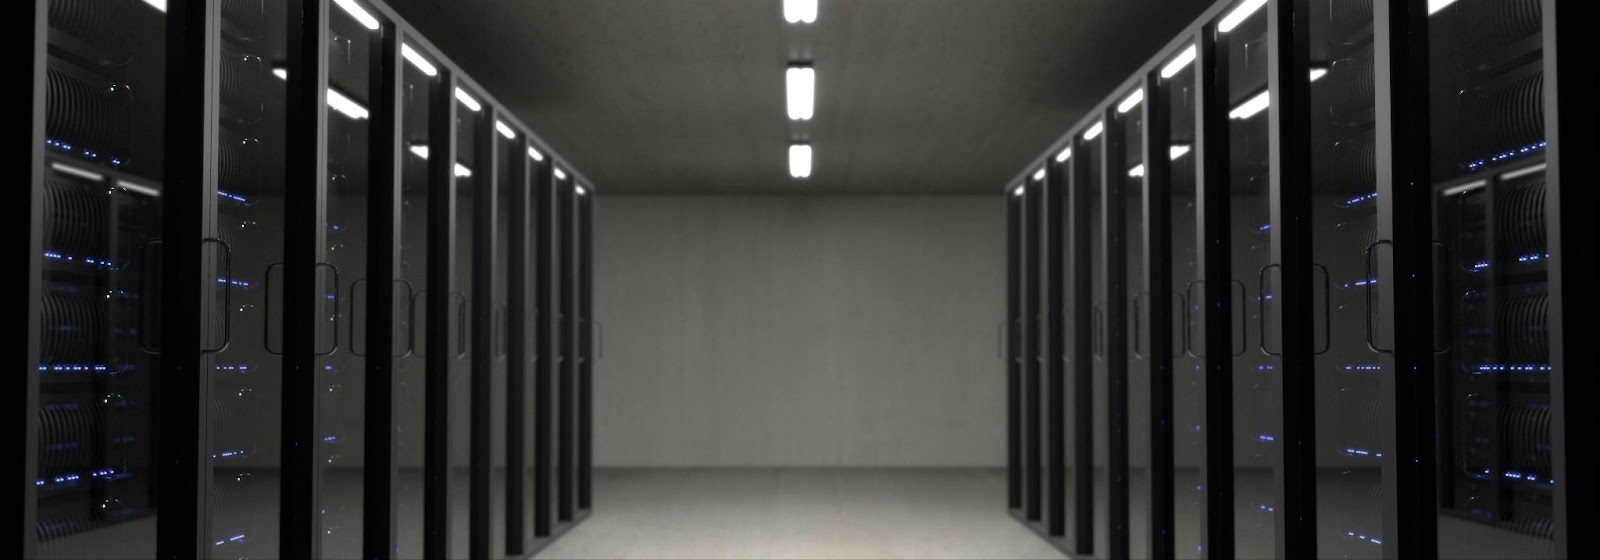 A view of a server room with server racks along both sides.